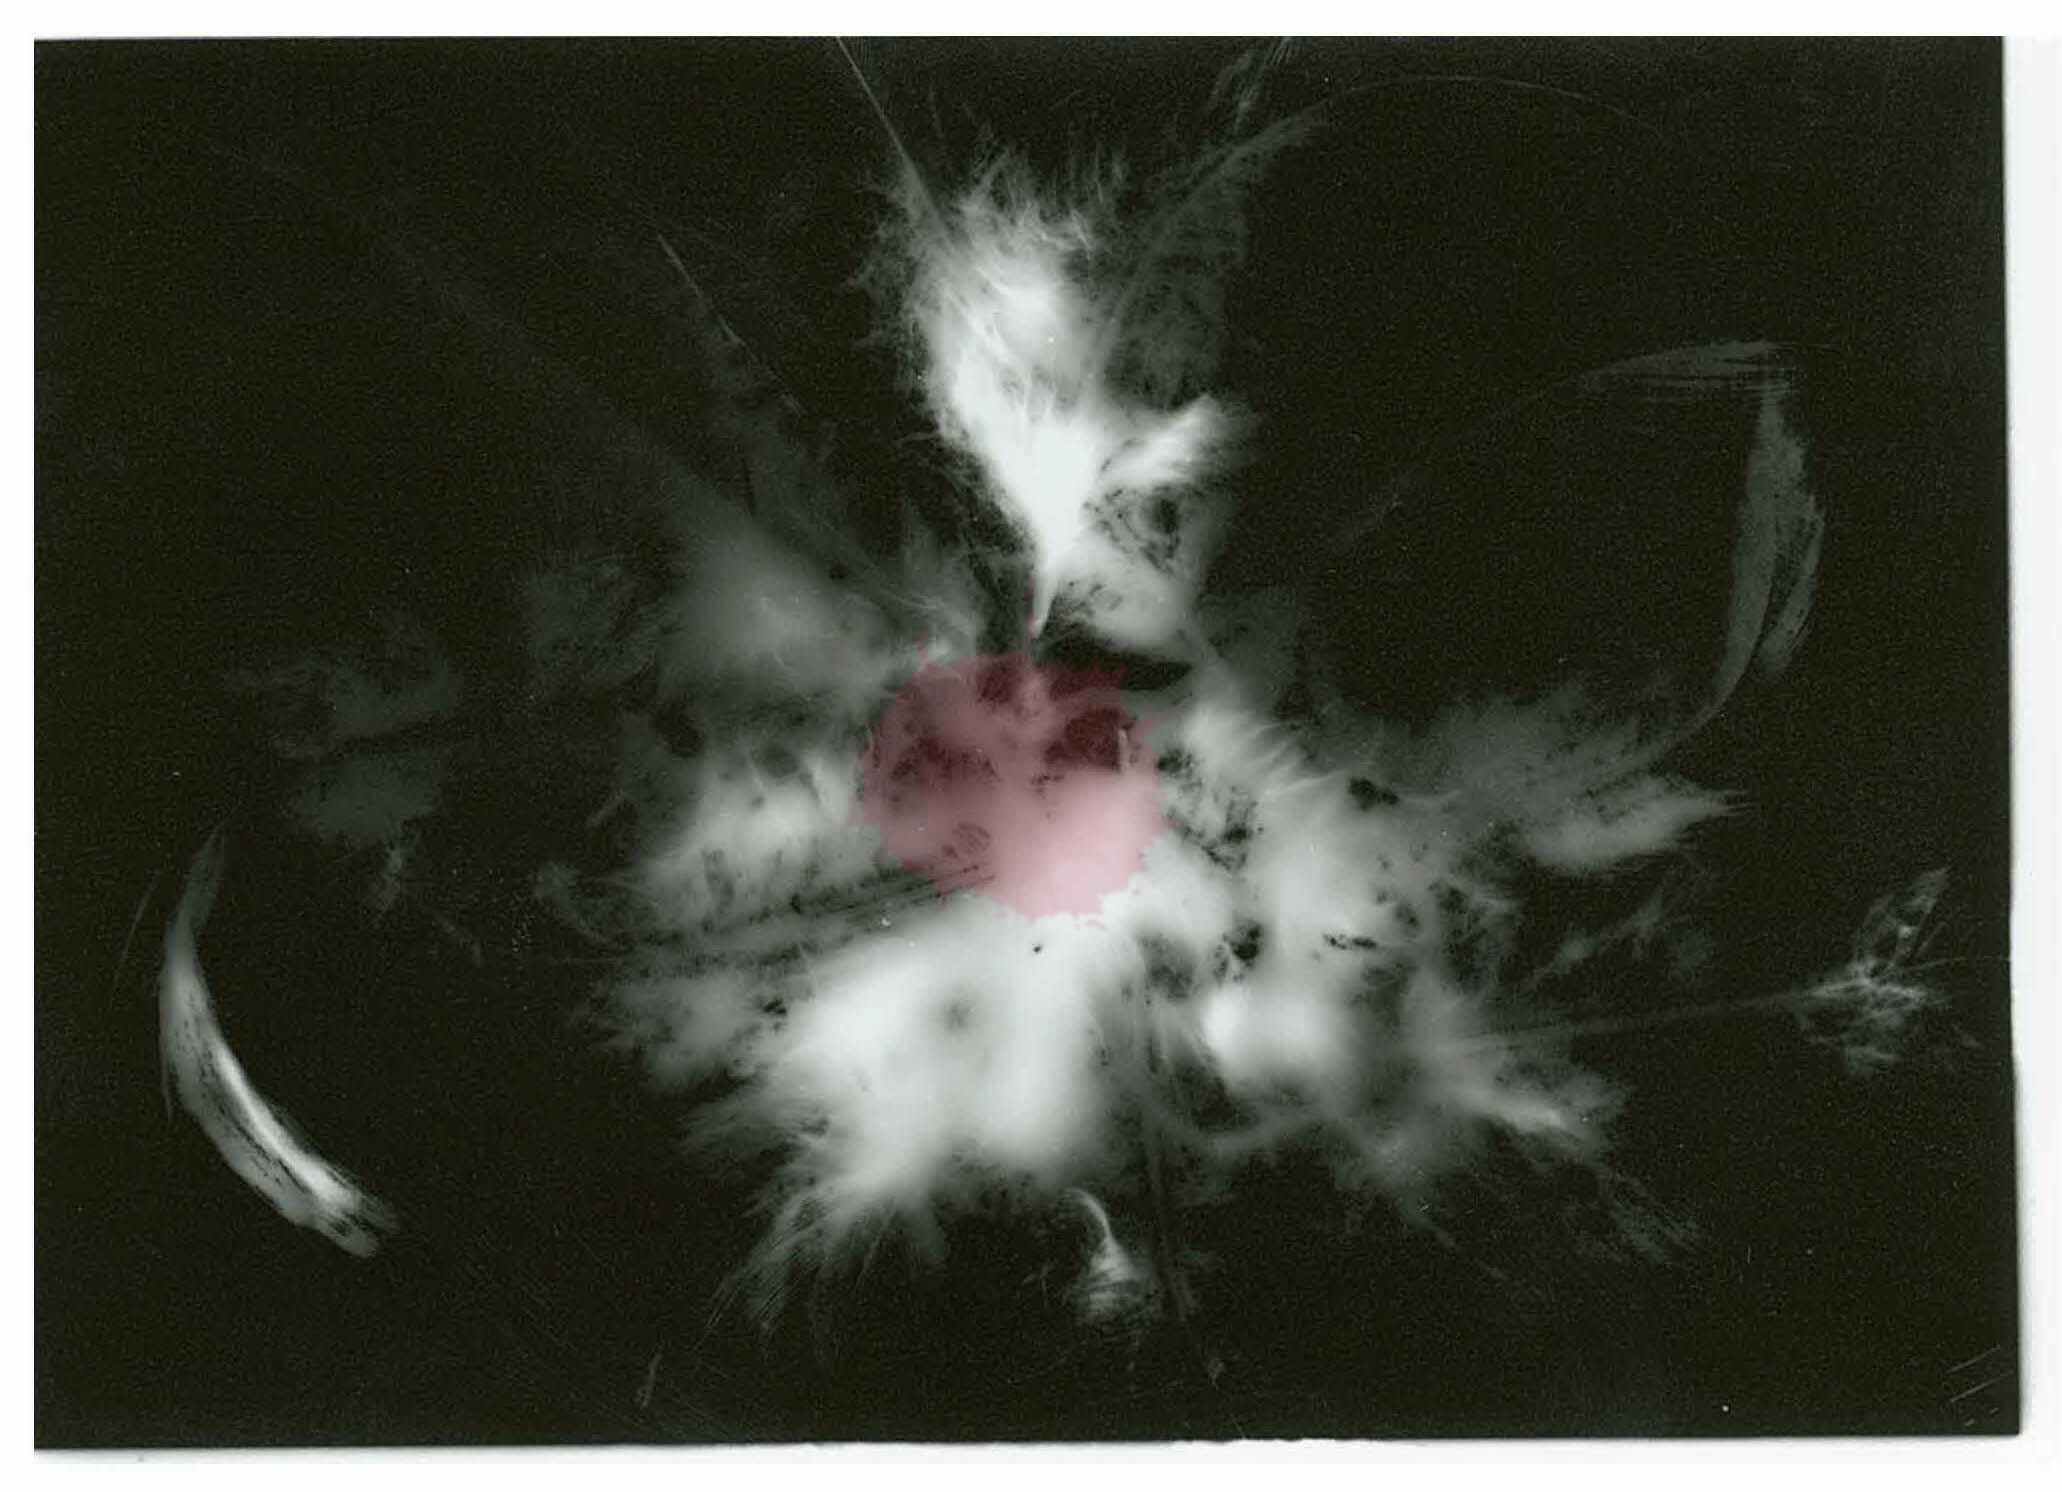 A bouquet of downy faux feathers printed on black & white, silver gelatin photo paper - 2018